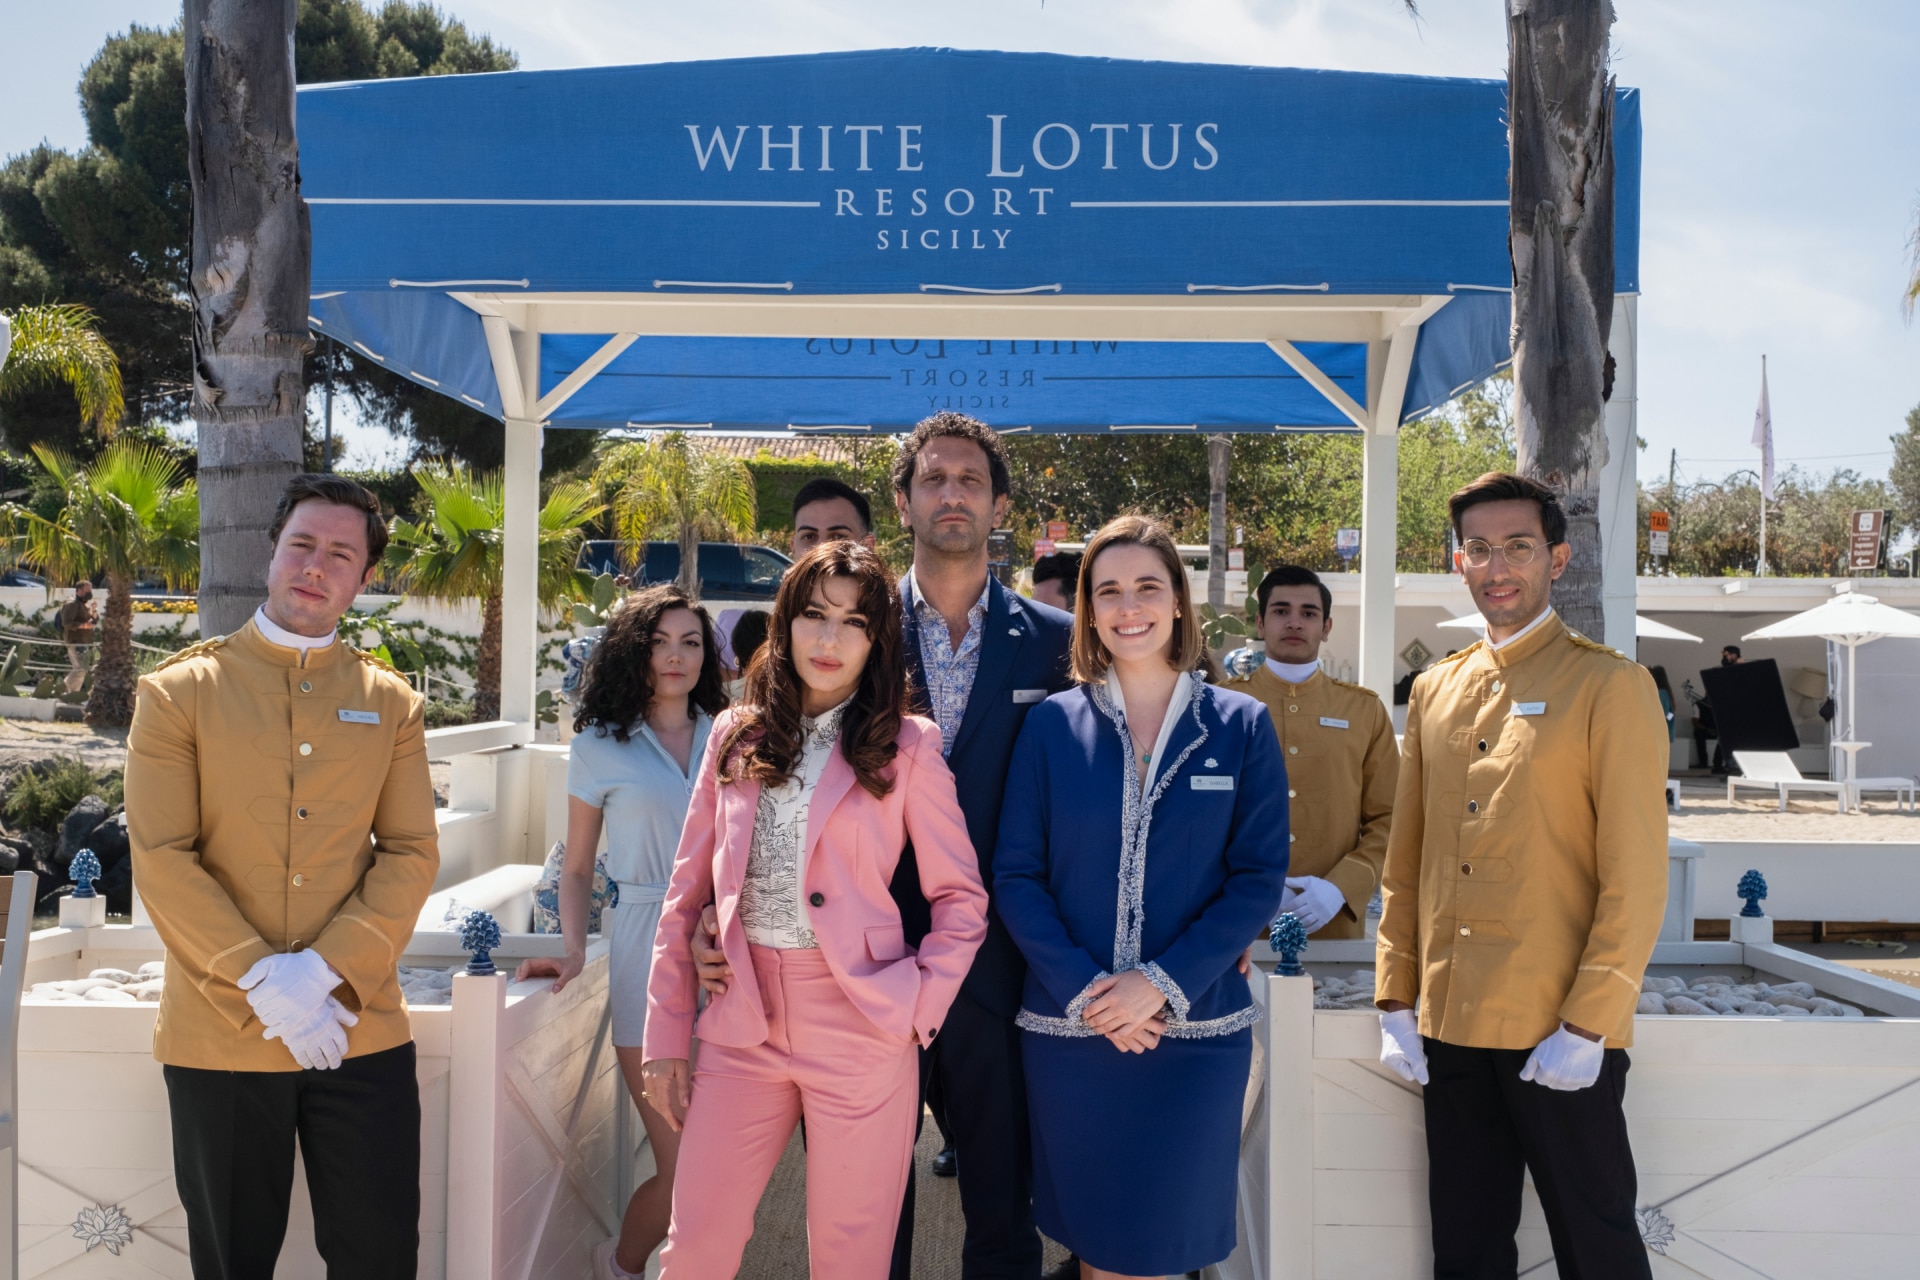 Meet 'The White Lotus' Season 2 Cast and Characters